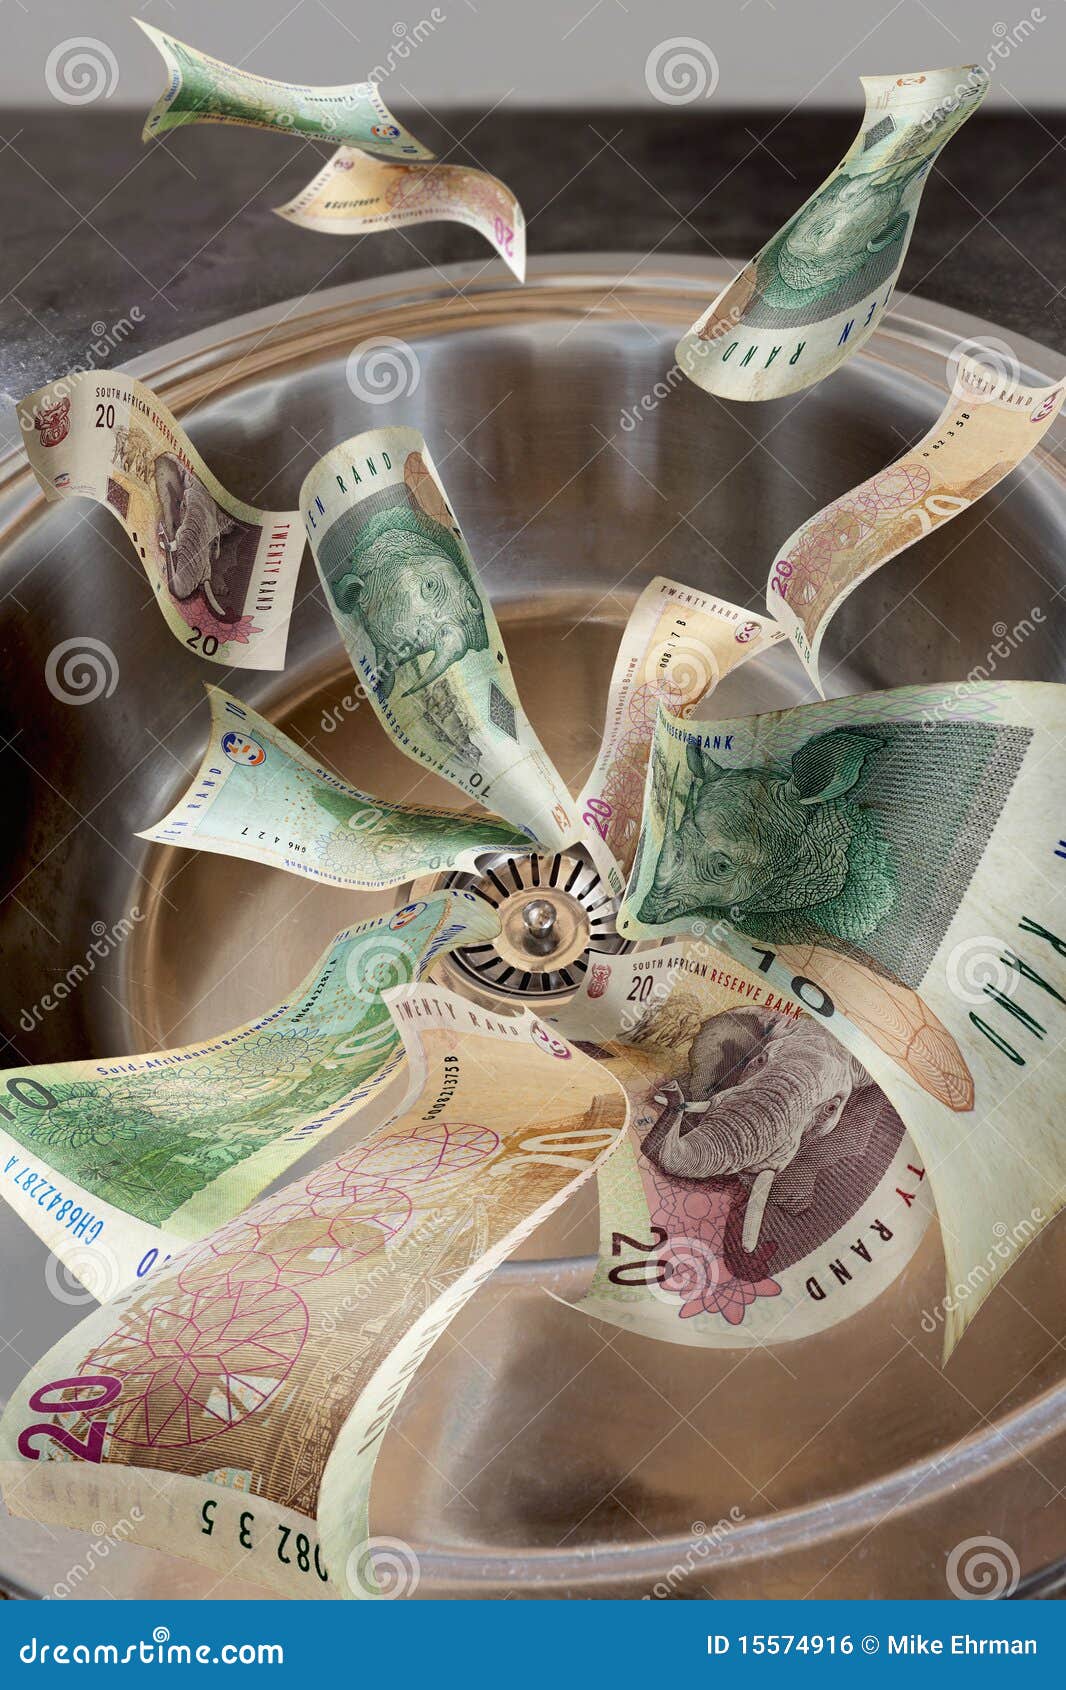 clipart of money going down the drain - photo #44